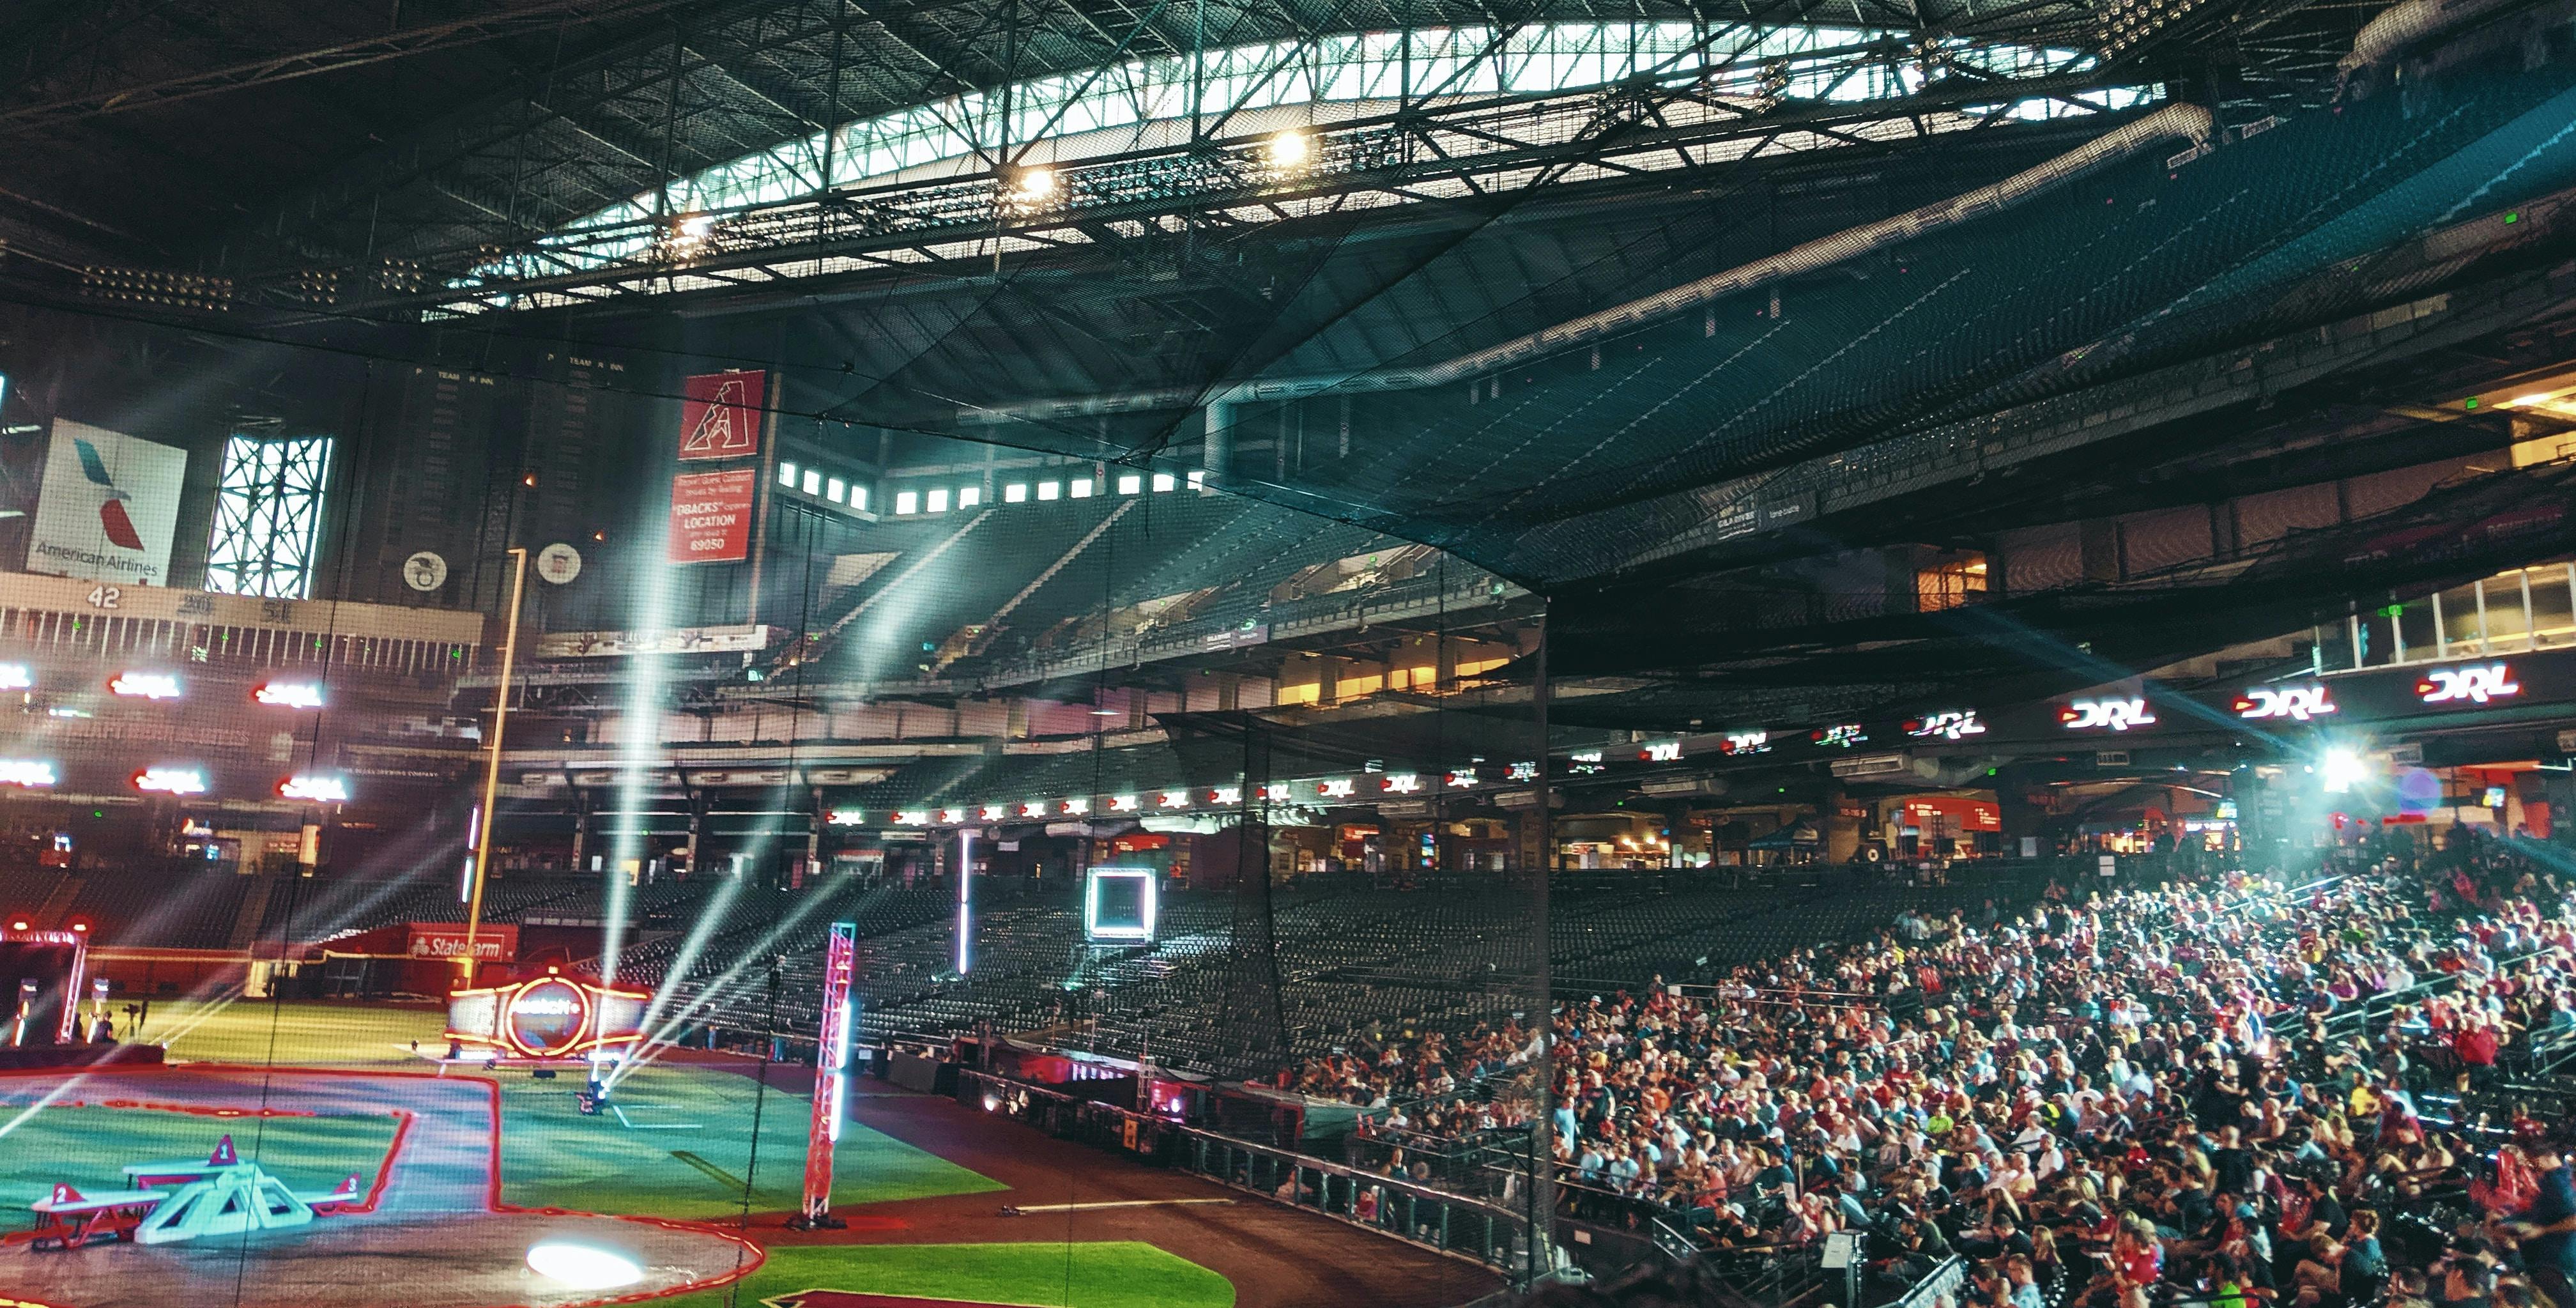 Chase Field roof won't open or close with fans inside to start the season